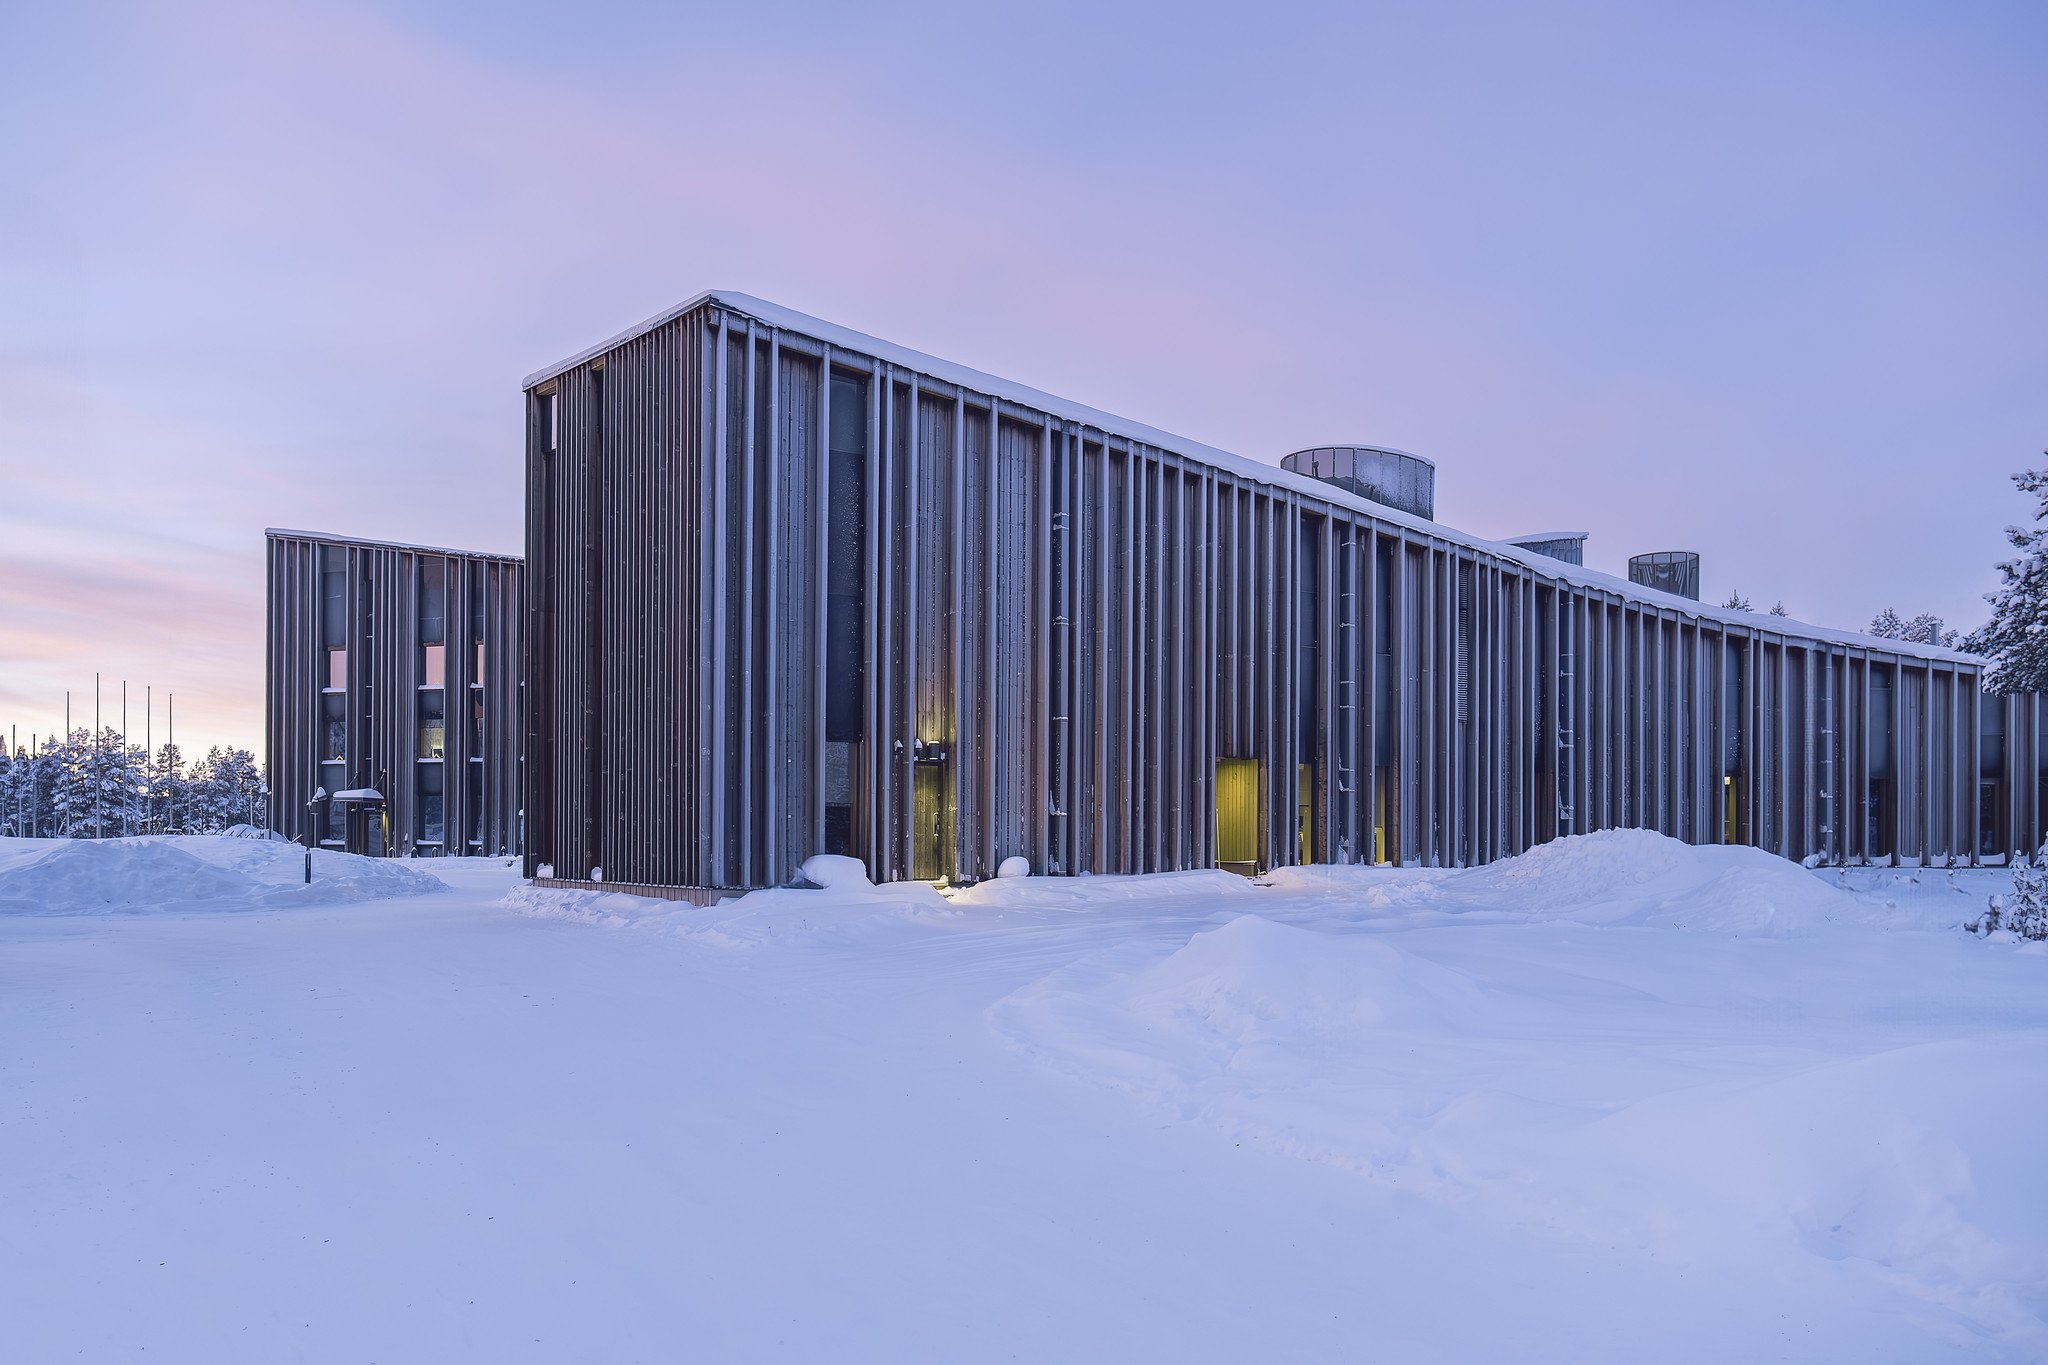 The Sámi Cultural Centre Sajos | Finland by HALO Architects